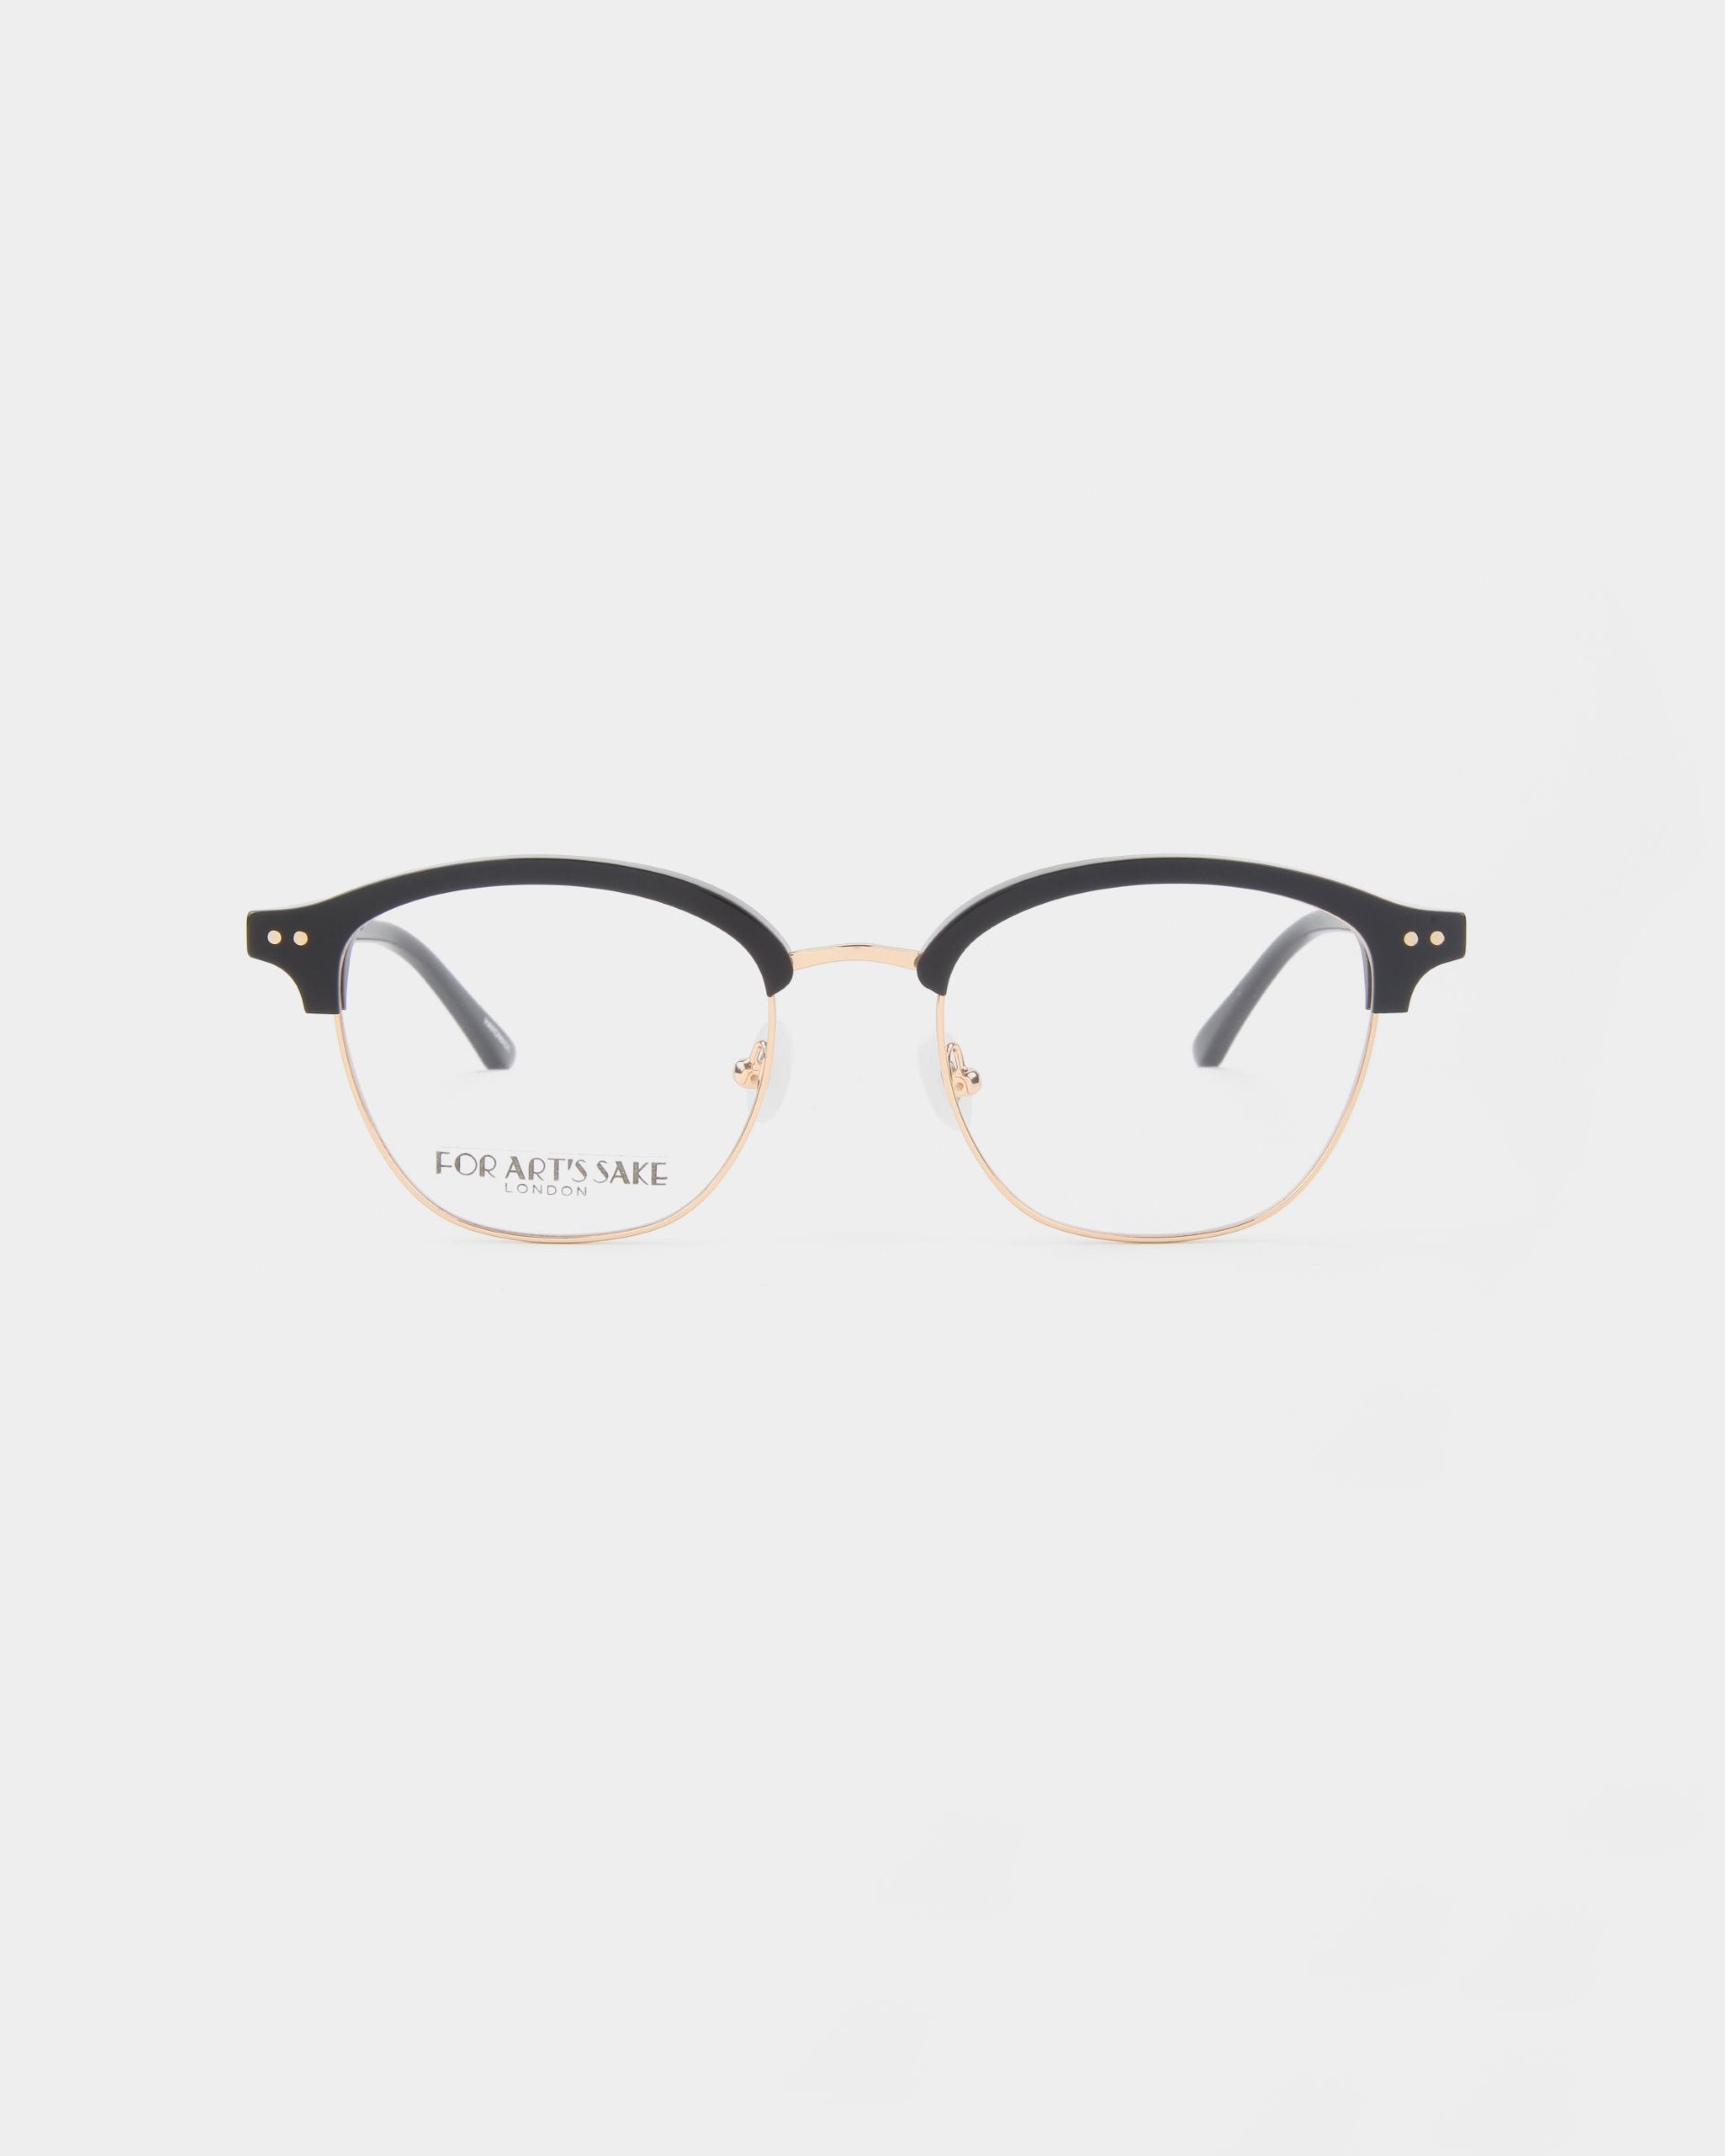 A pair of round Painkiller eyeglasses by For Art&#39;s Sake® featuring a thin, gold metal frame with black accents on the top half of the rims and black temple tips. The clear lenses offer a minimalist design with an optional Blue Light Filter for added comfort. The background is plain white.